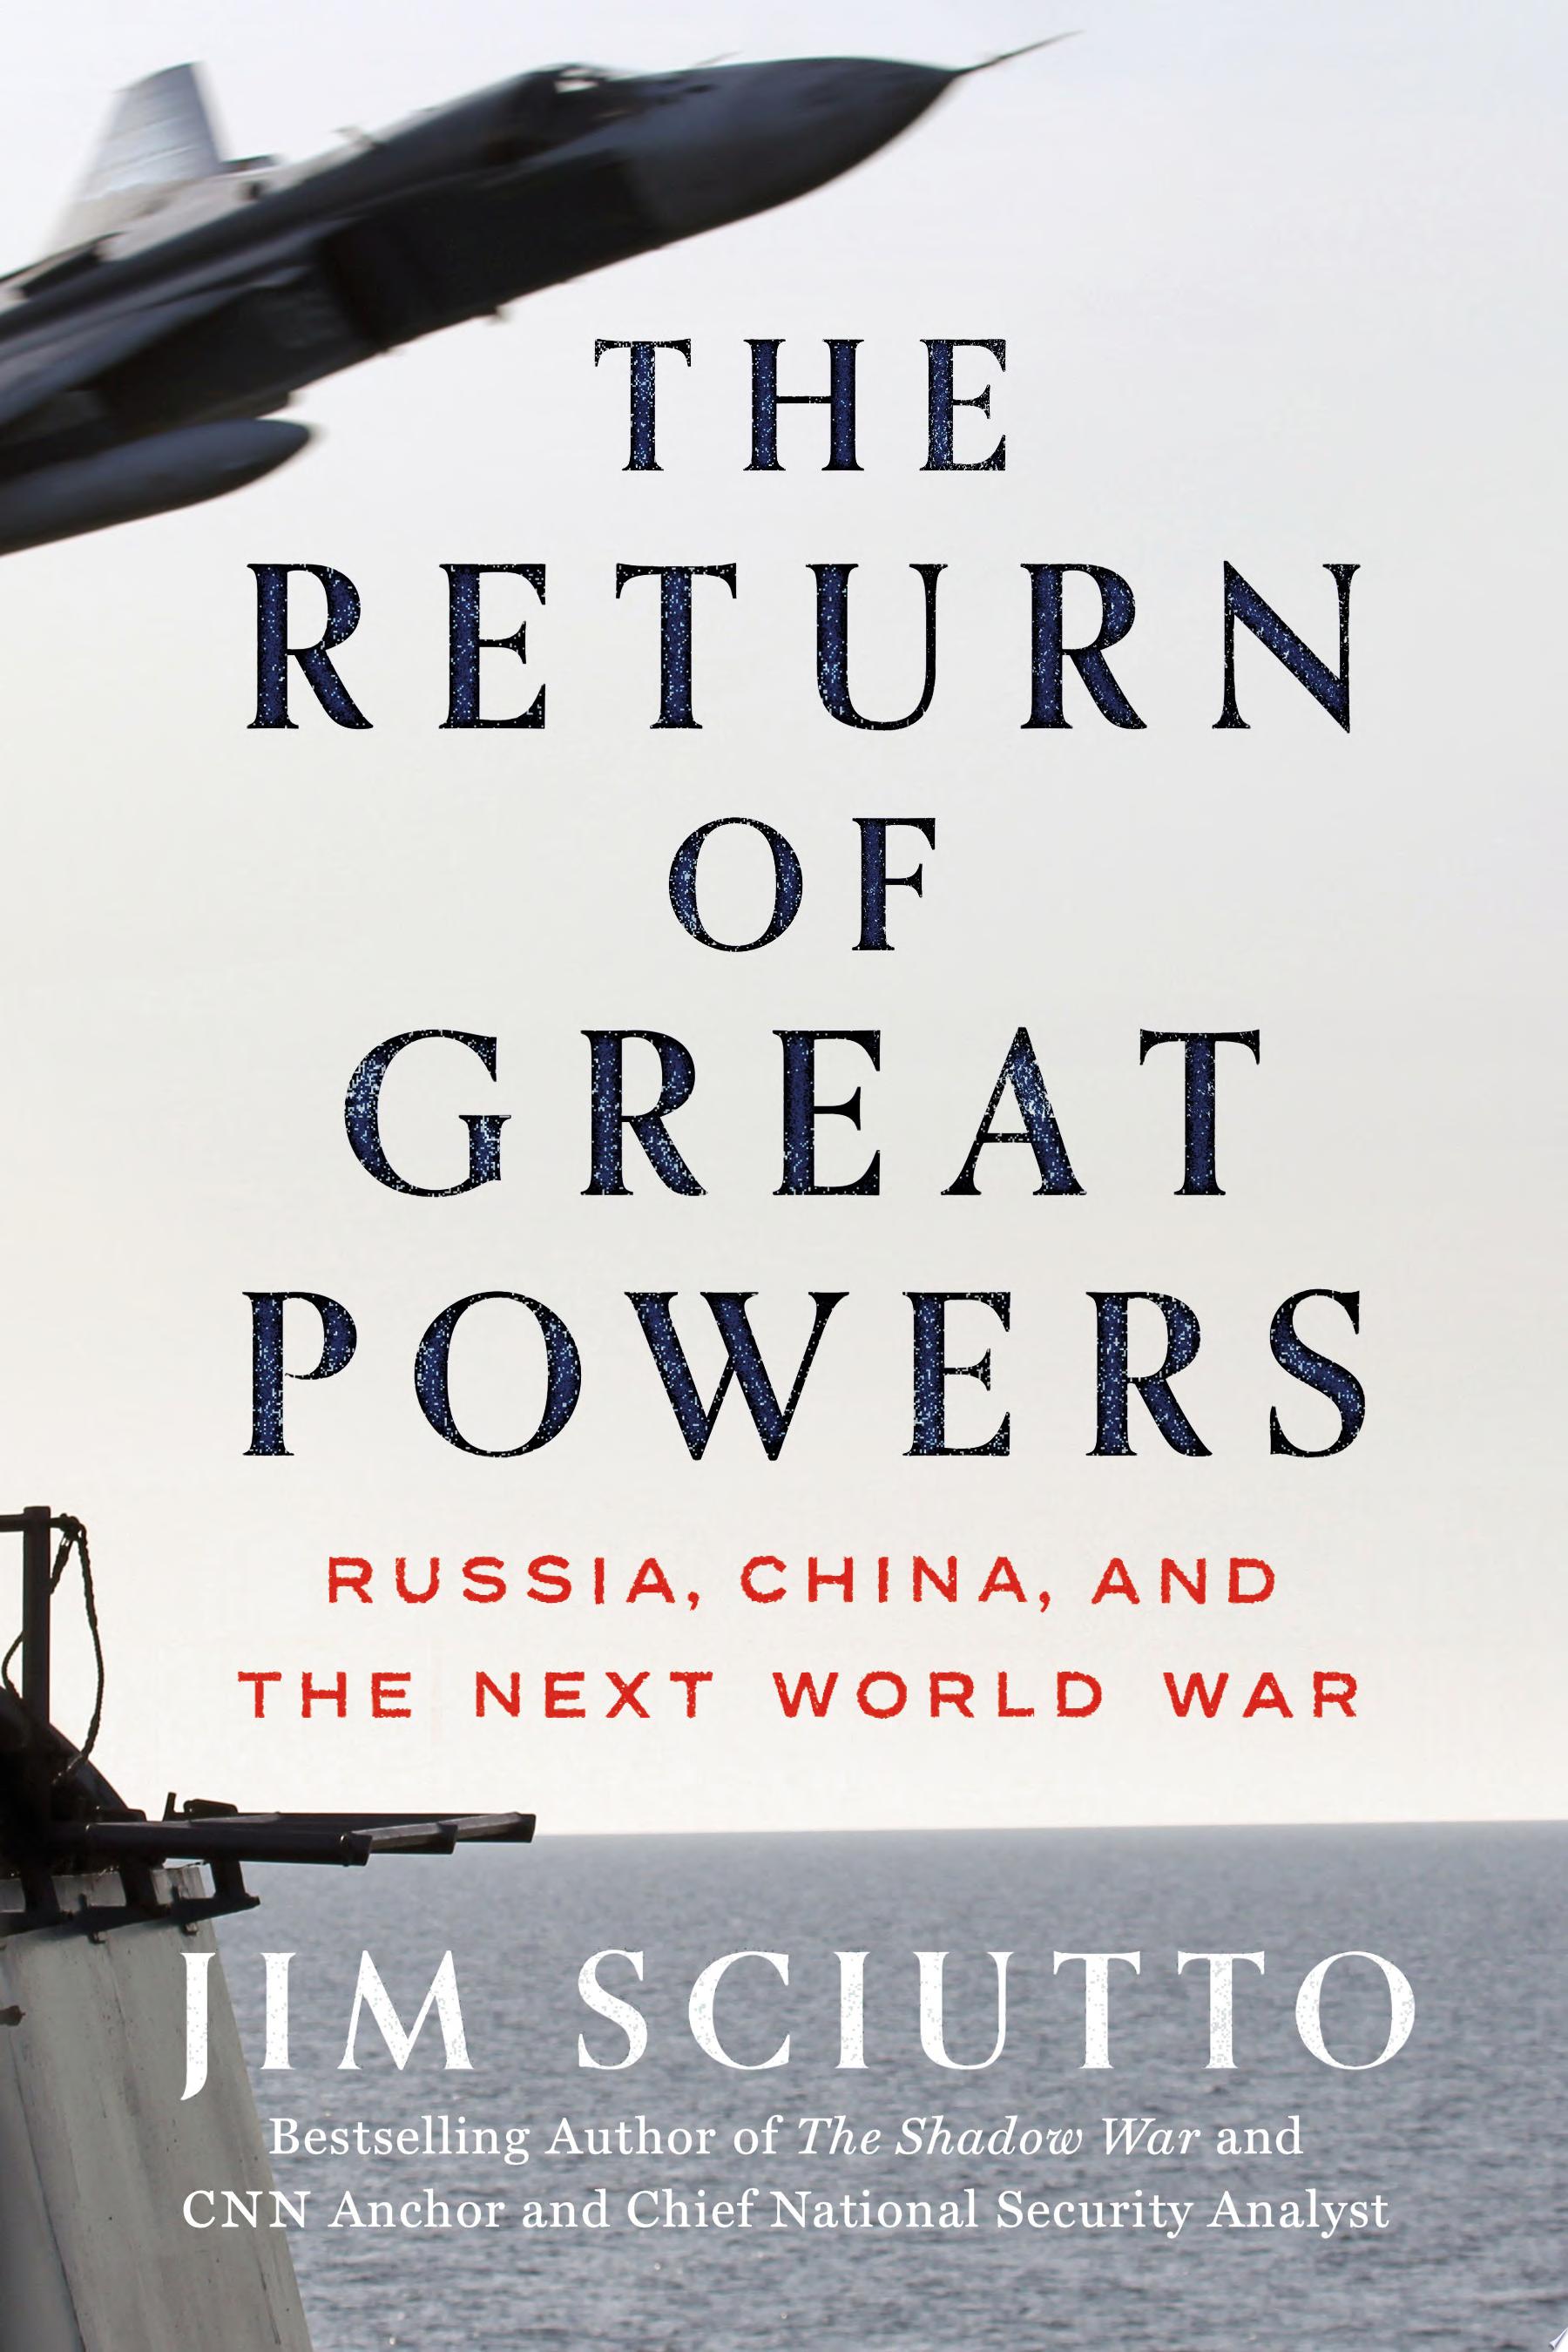 Image for "The Return of Great Powers"